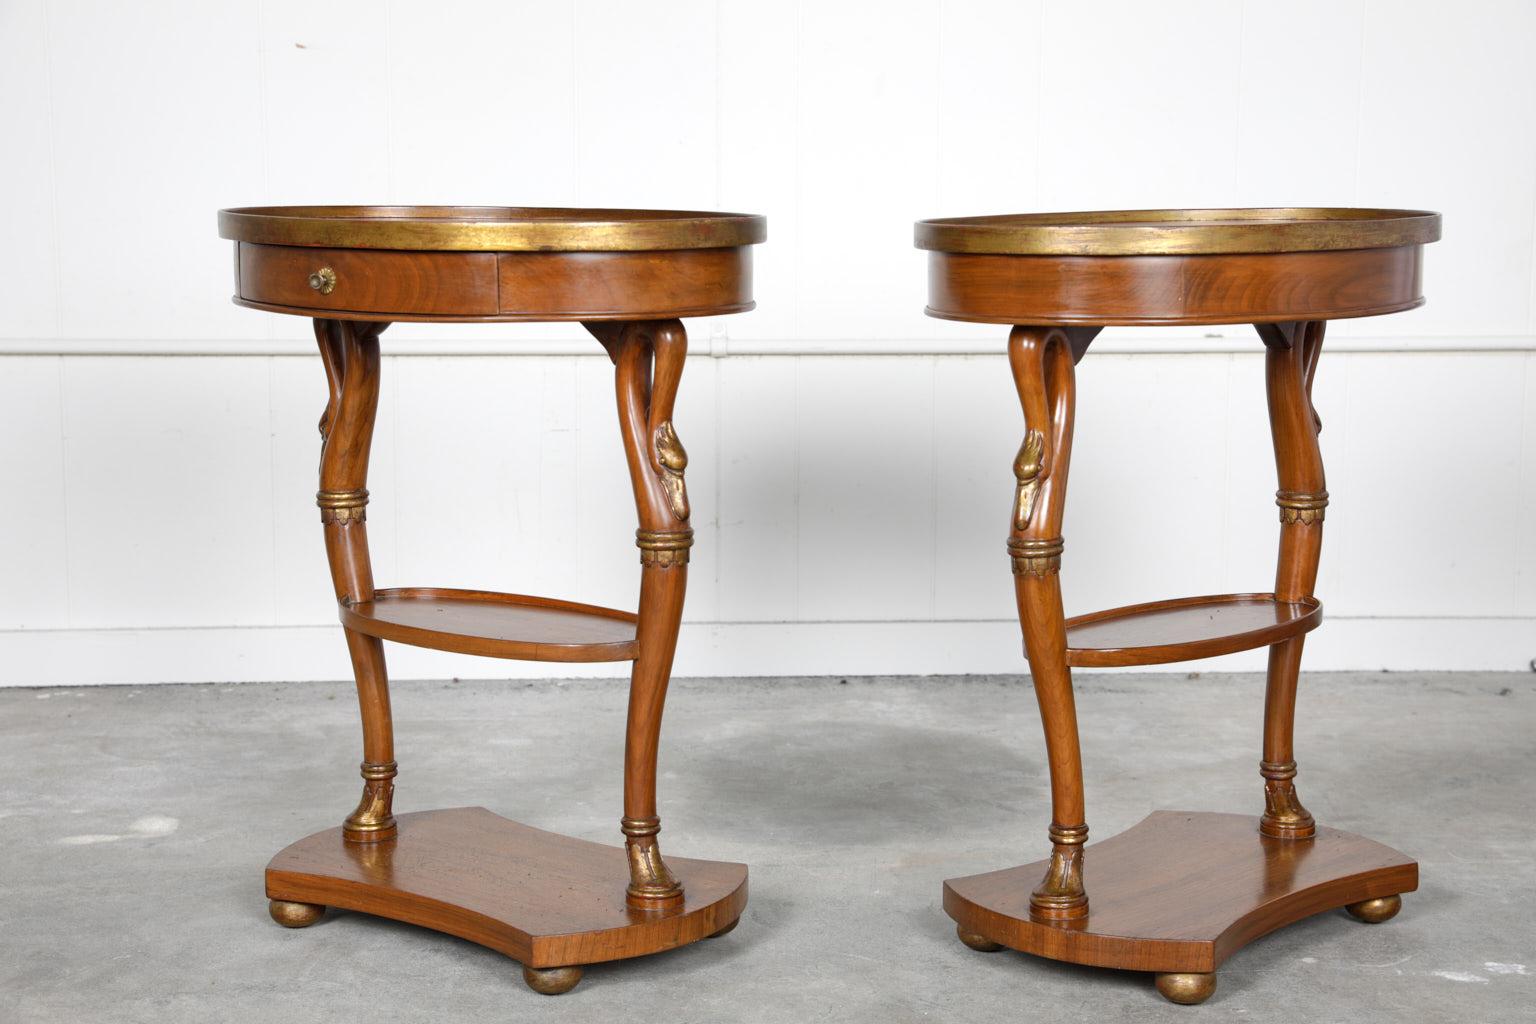 20th Century Pair of French Directore Style Side Tables